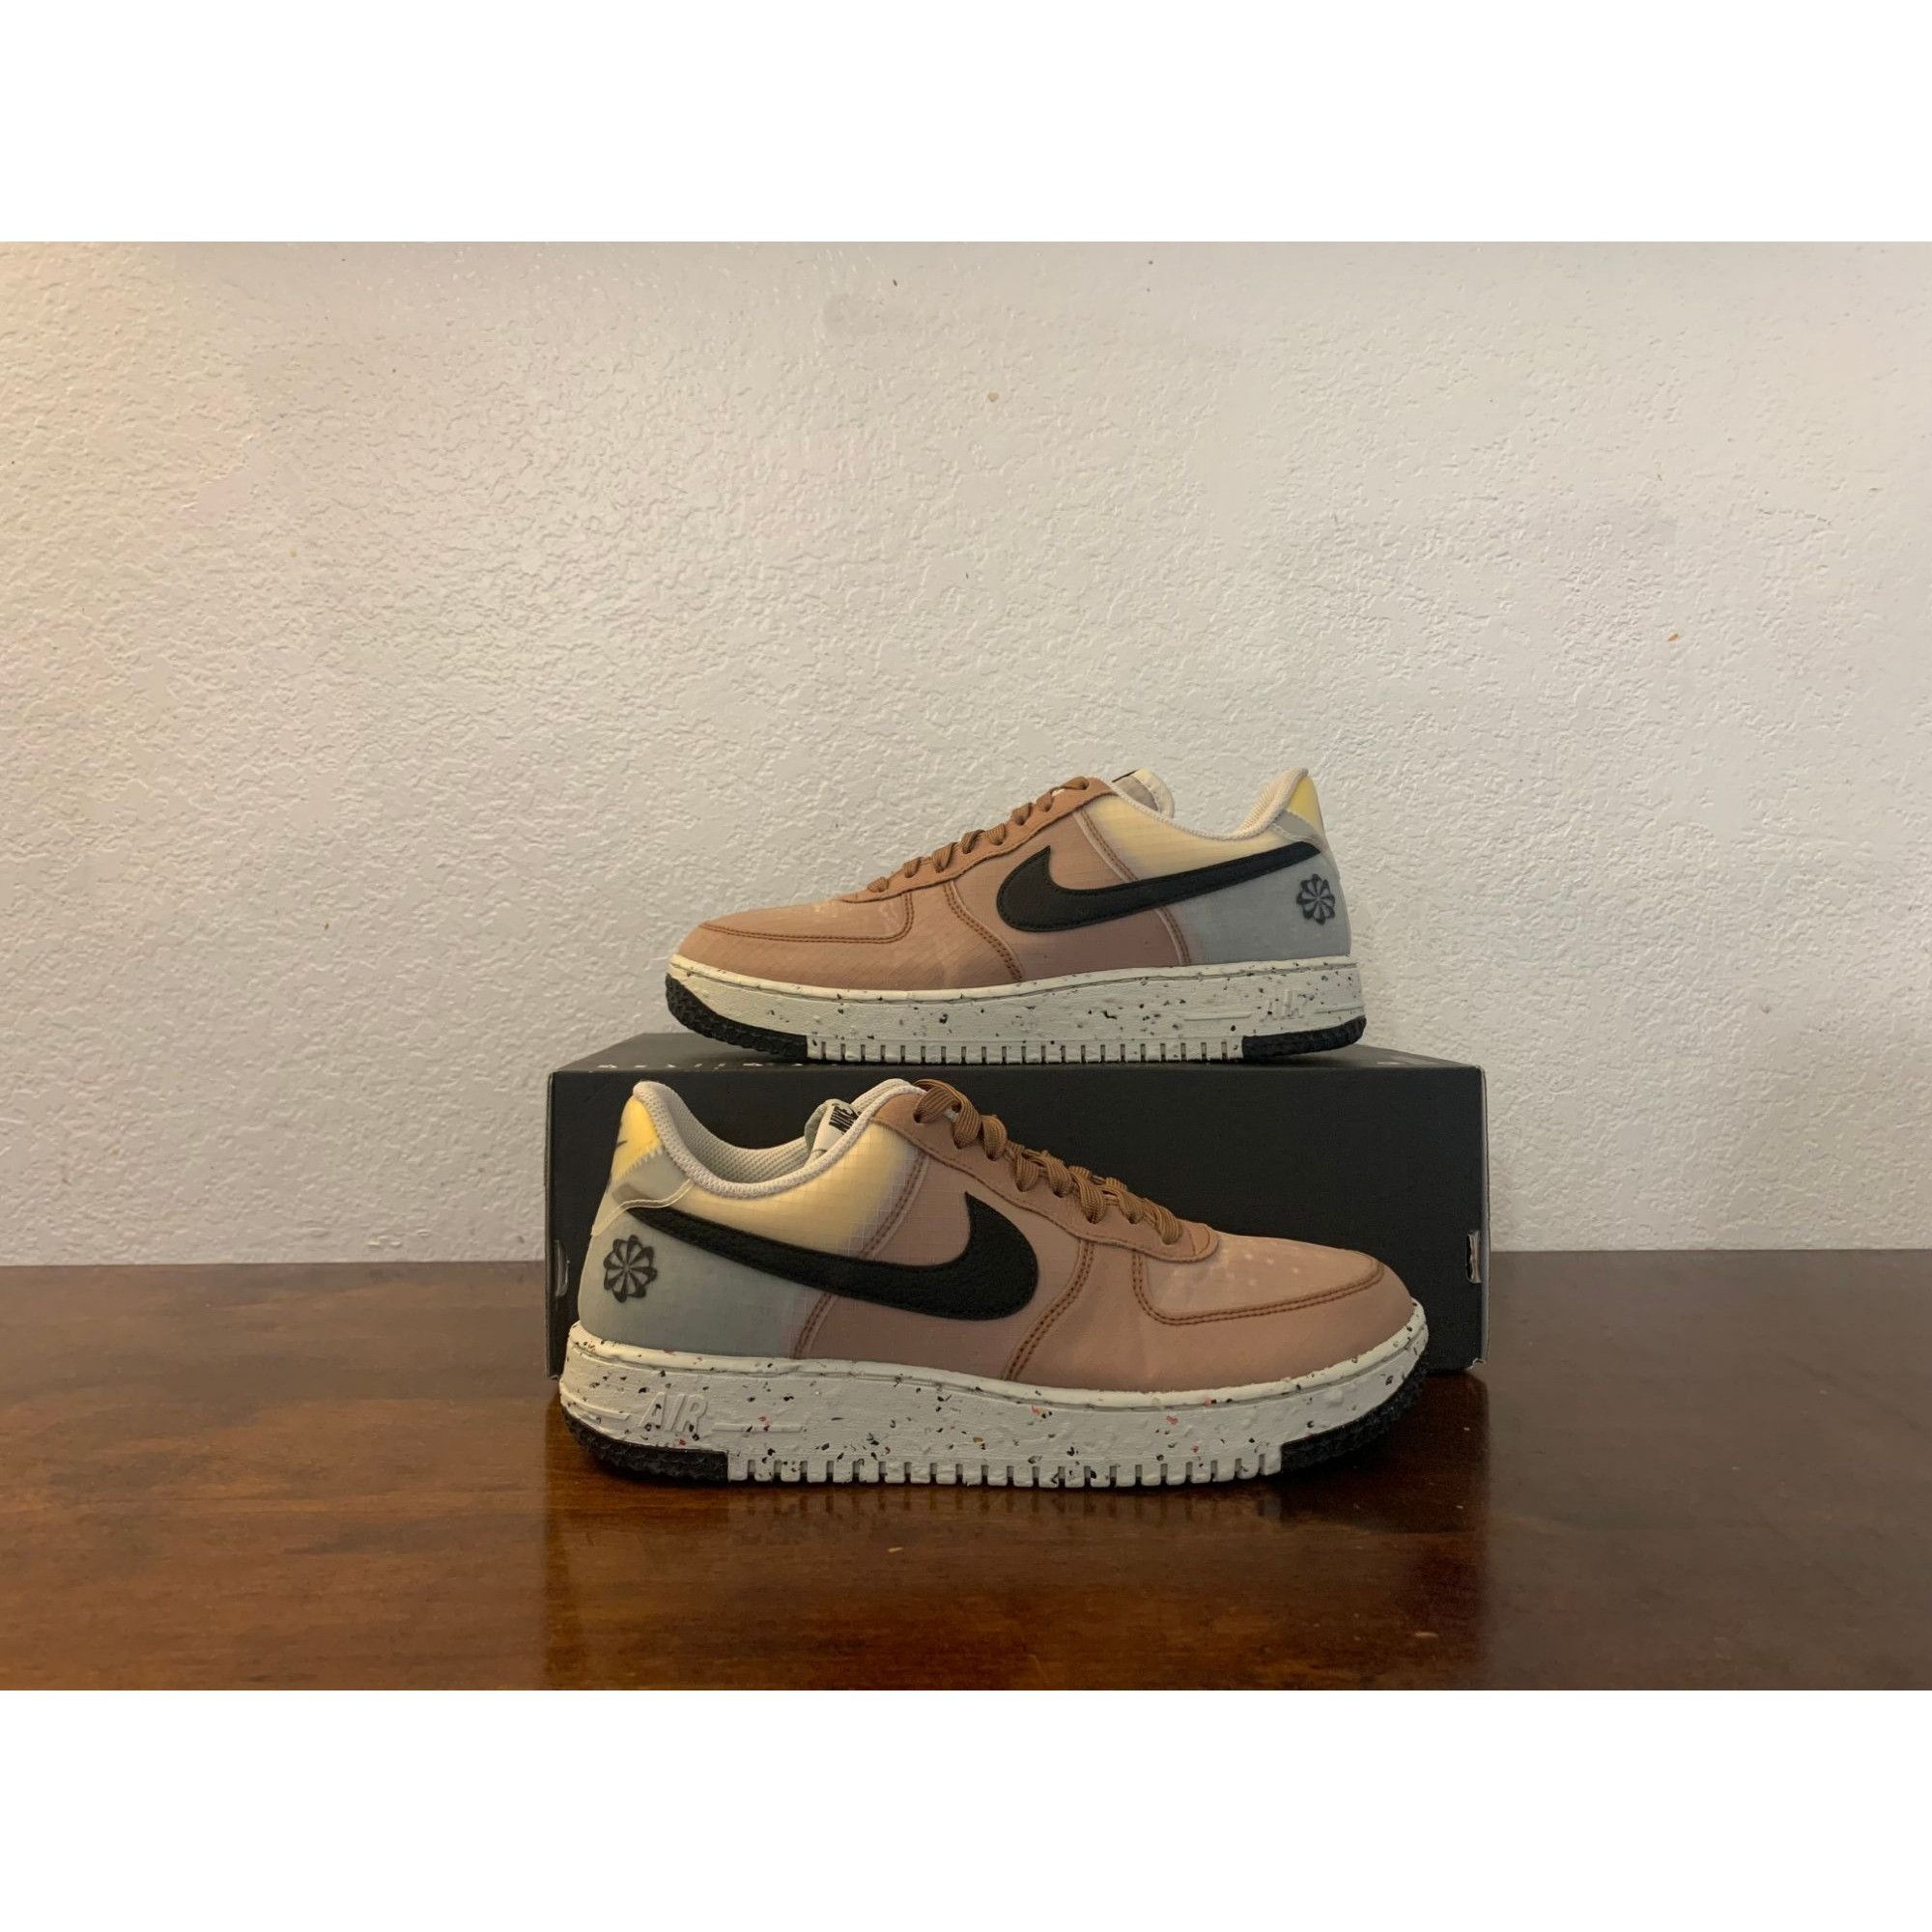 New Nike Air Force 1 Crater Archaeo Brown Black DH2521-200 Mens Sz 9